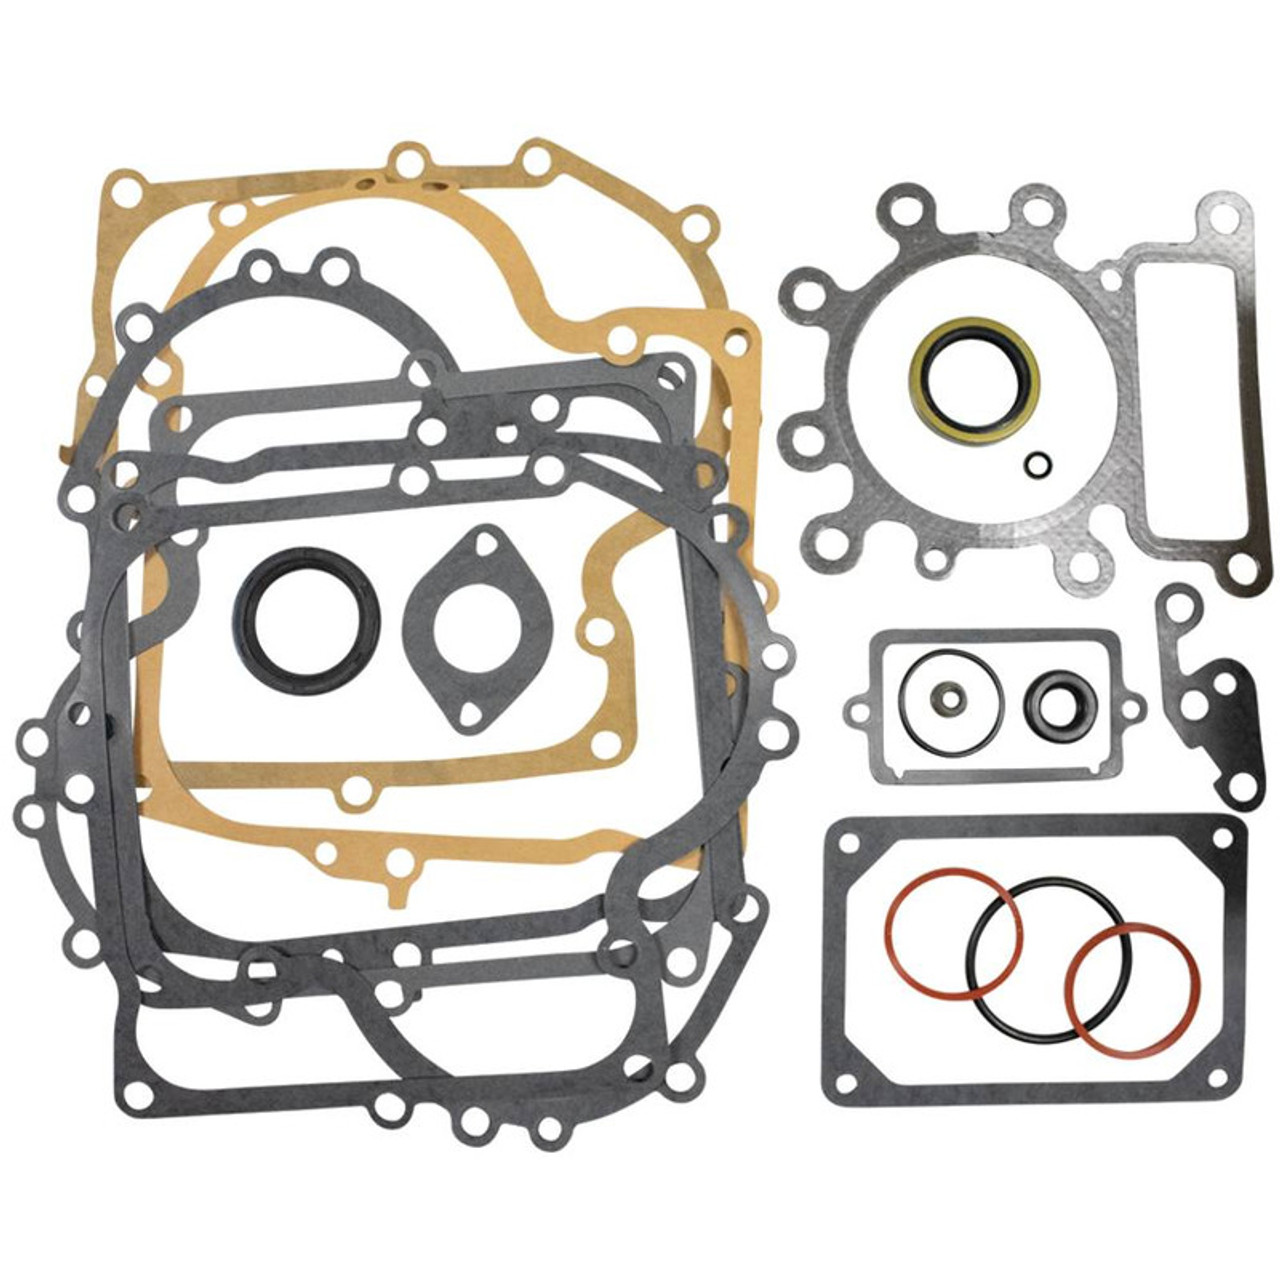 Engine Gasket Set for Briggs and Stratton 691580, 287707, 287777, 28N707, 28N777 &